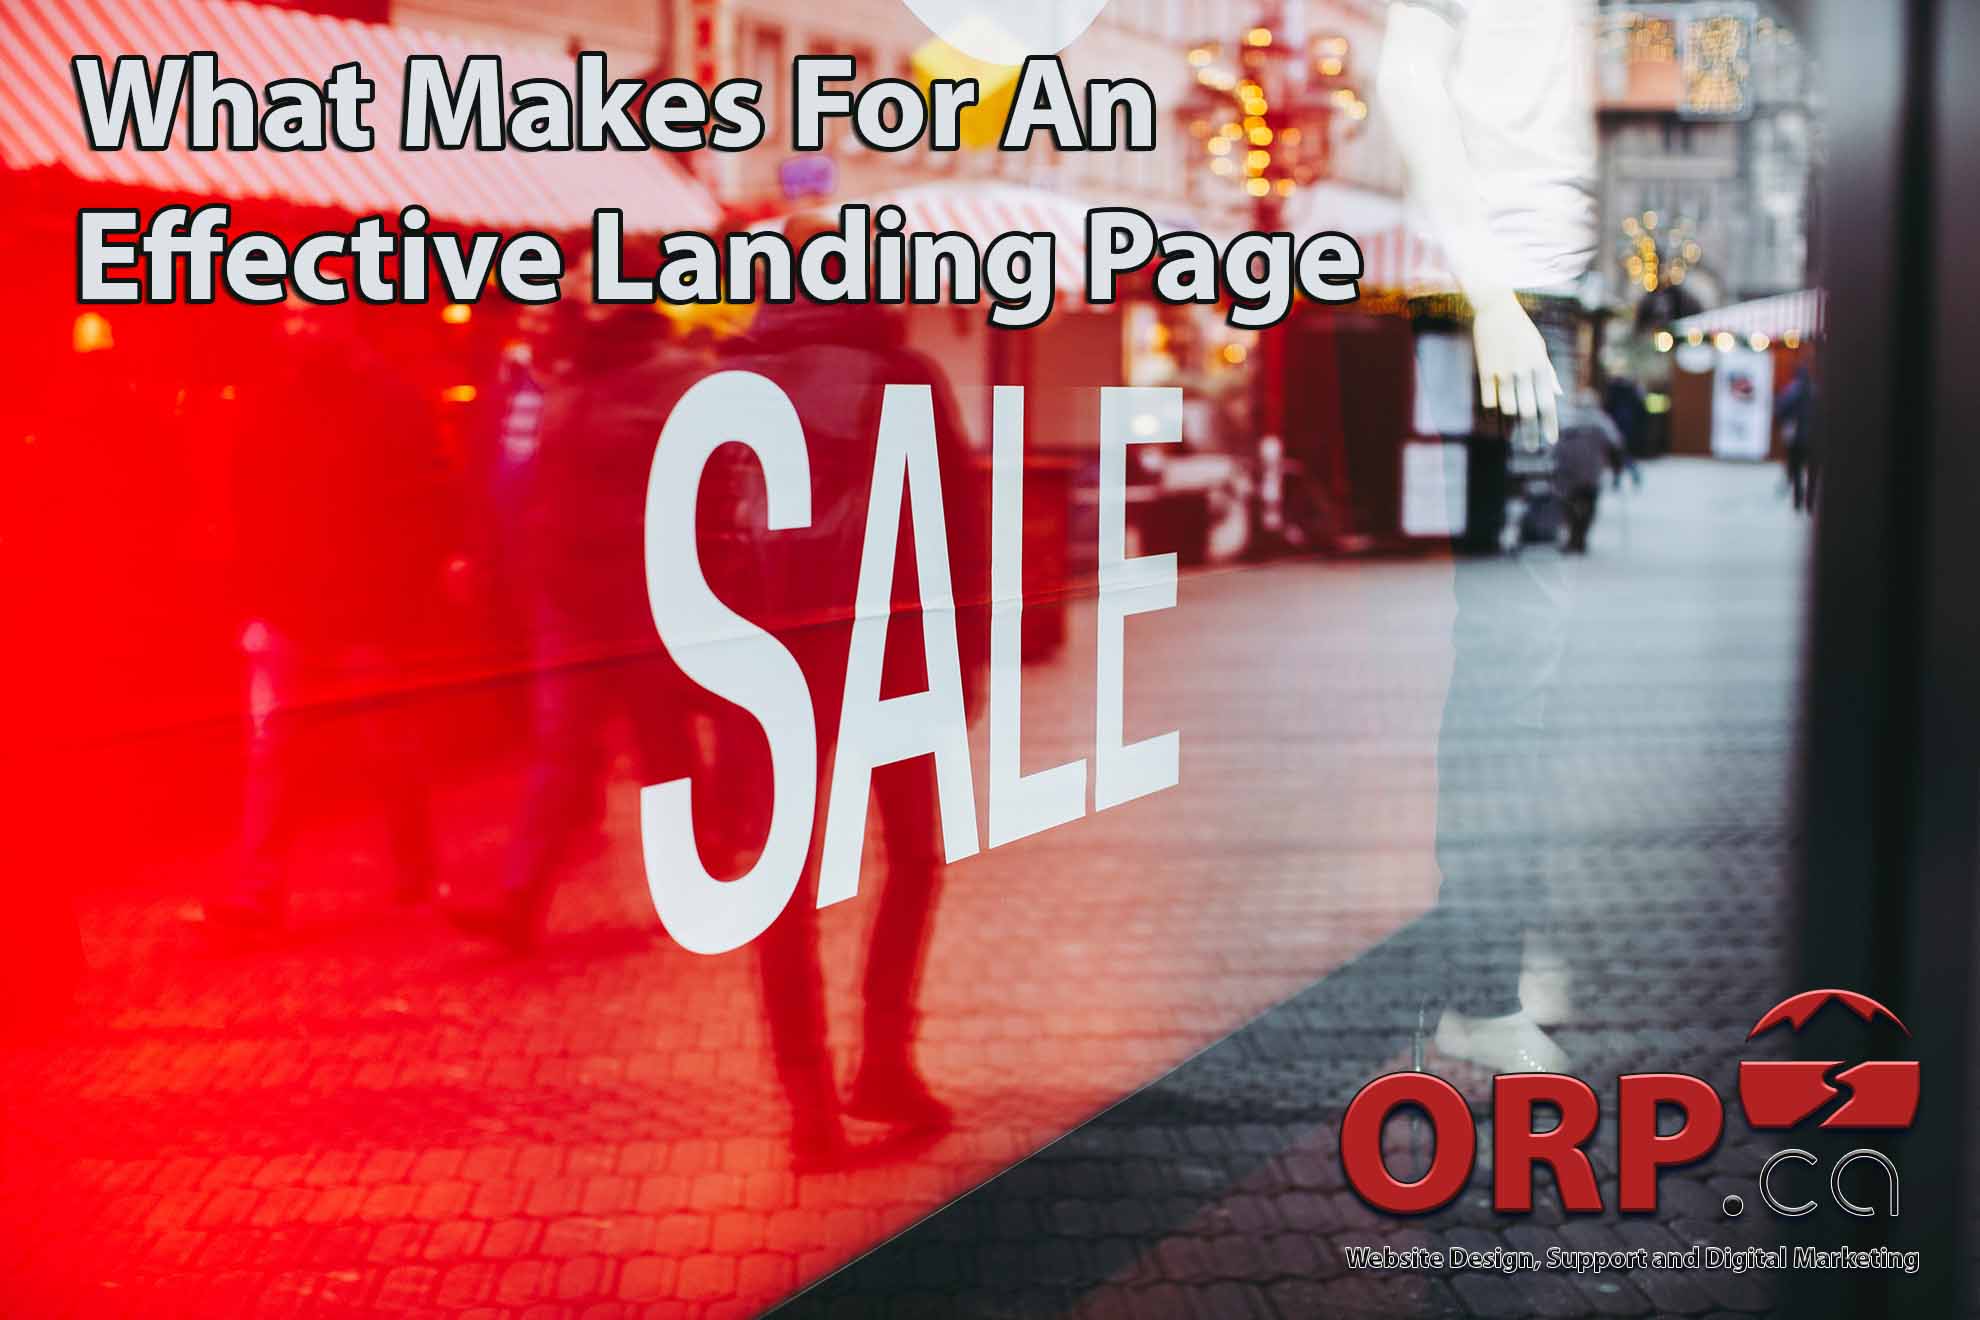 What Makes For An Effective Landing Page - a content marketing article for business professionals from ORP.ca - providing website design and development, small business digital marketing and consulting services since 2003